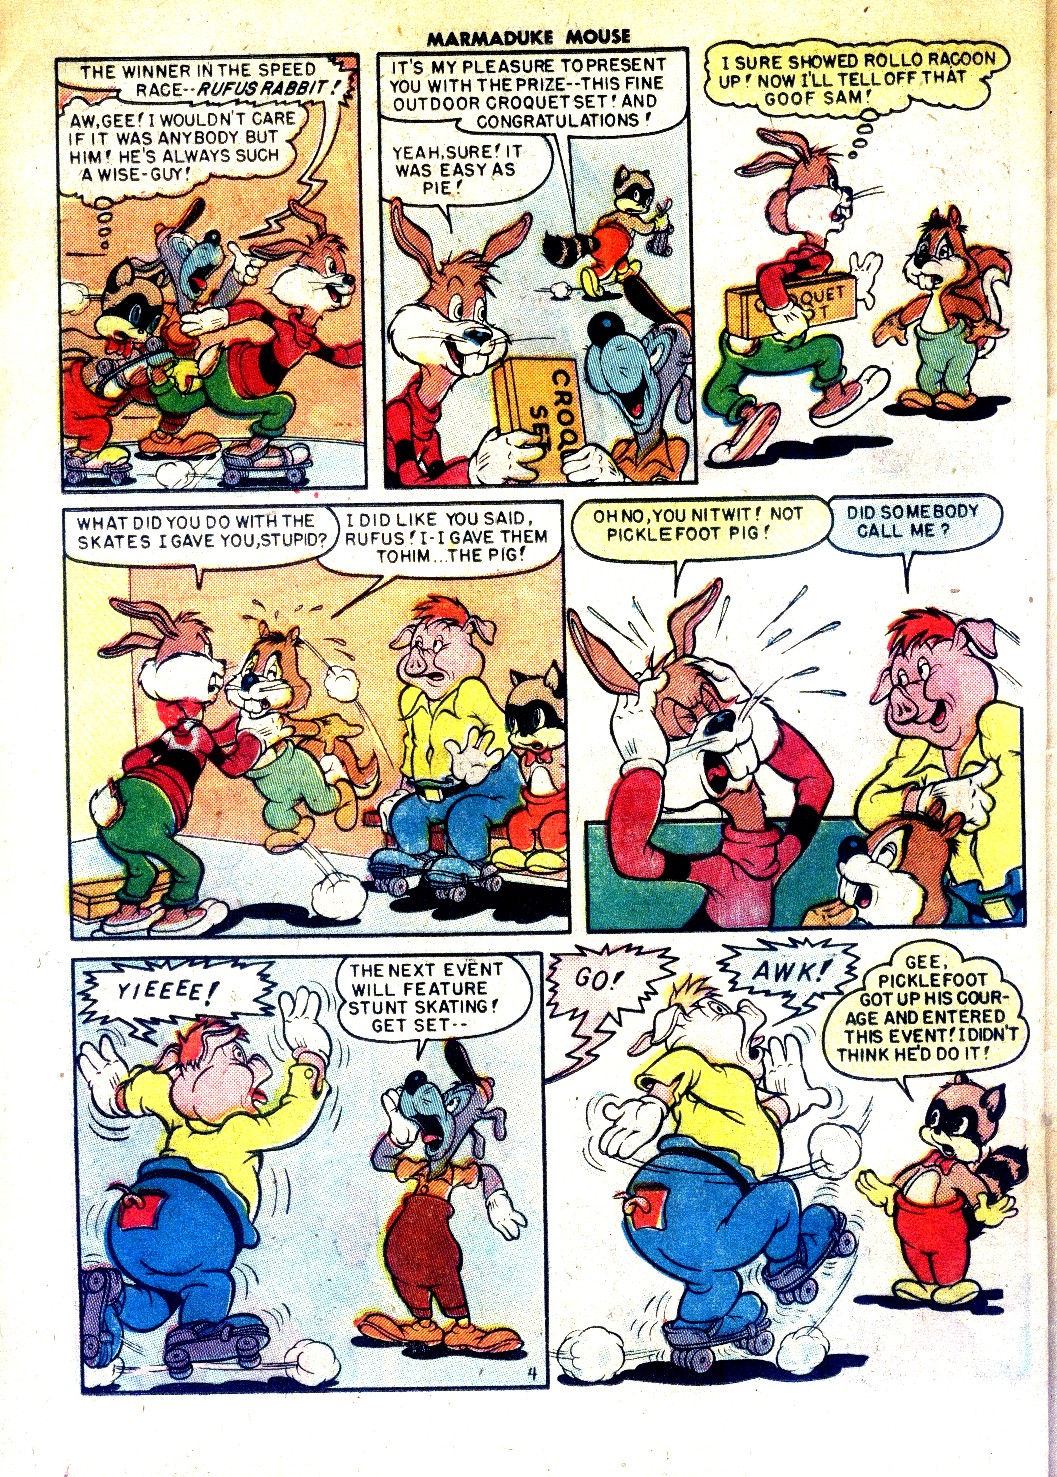 Read online Marmaduke Mouse comic -  Issue #17 - 24